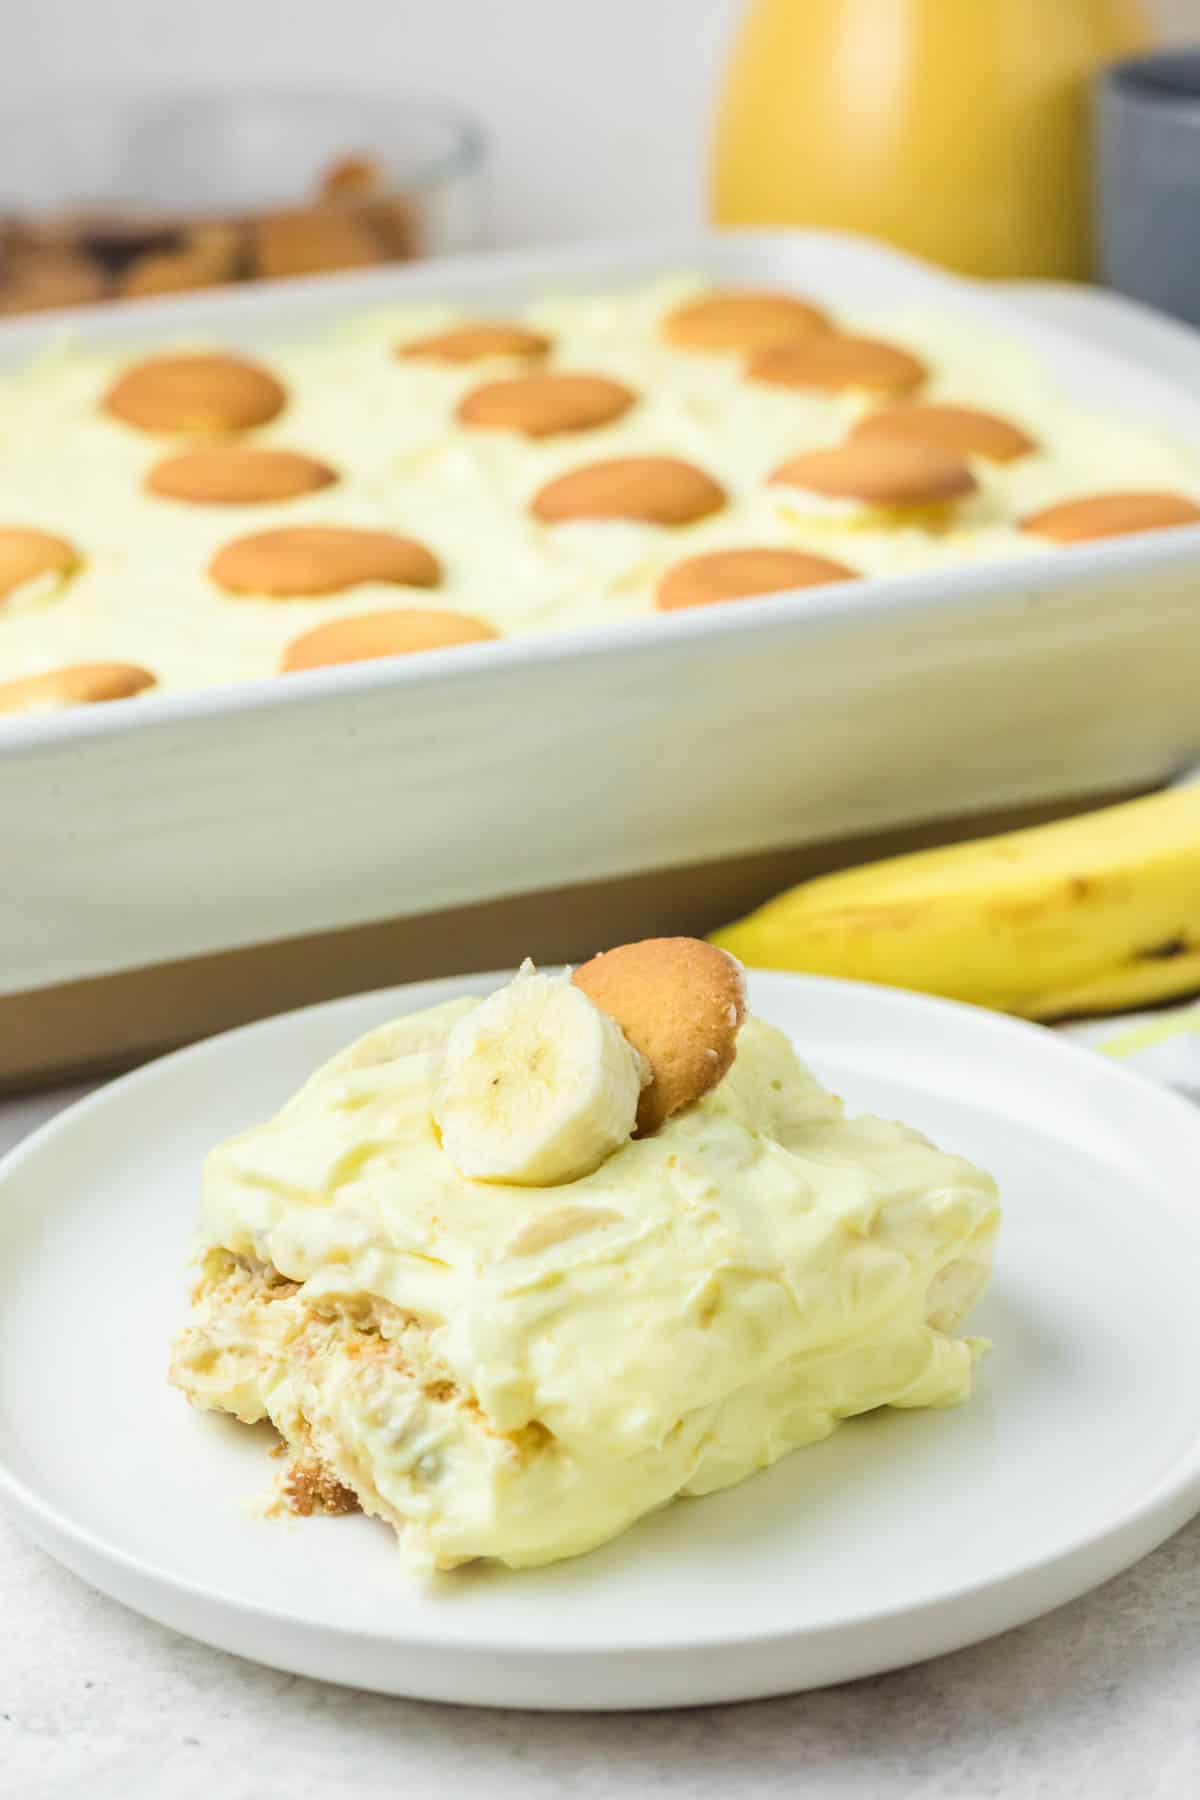 Banana pudding with sour cream on a plate and in a serving dish.